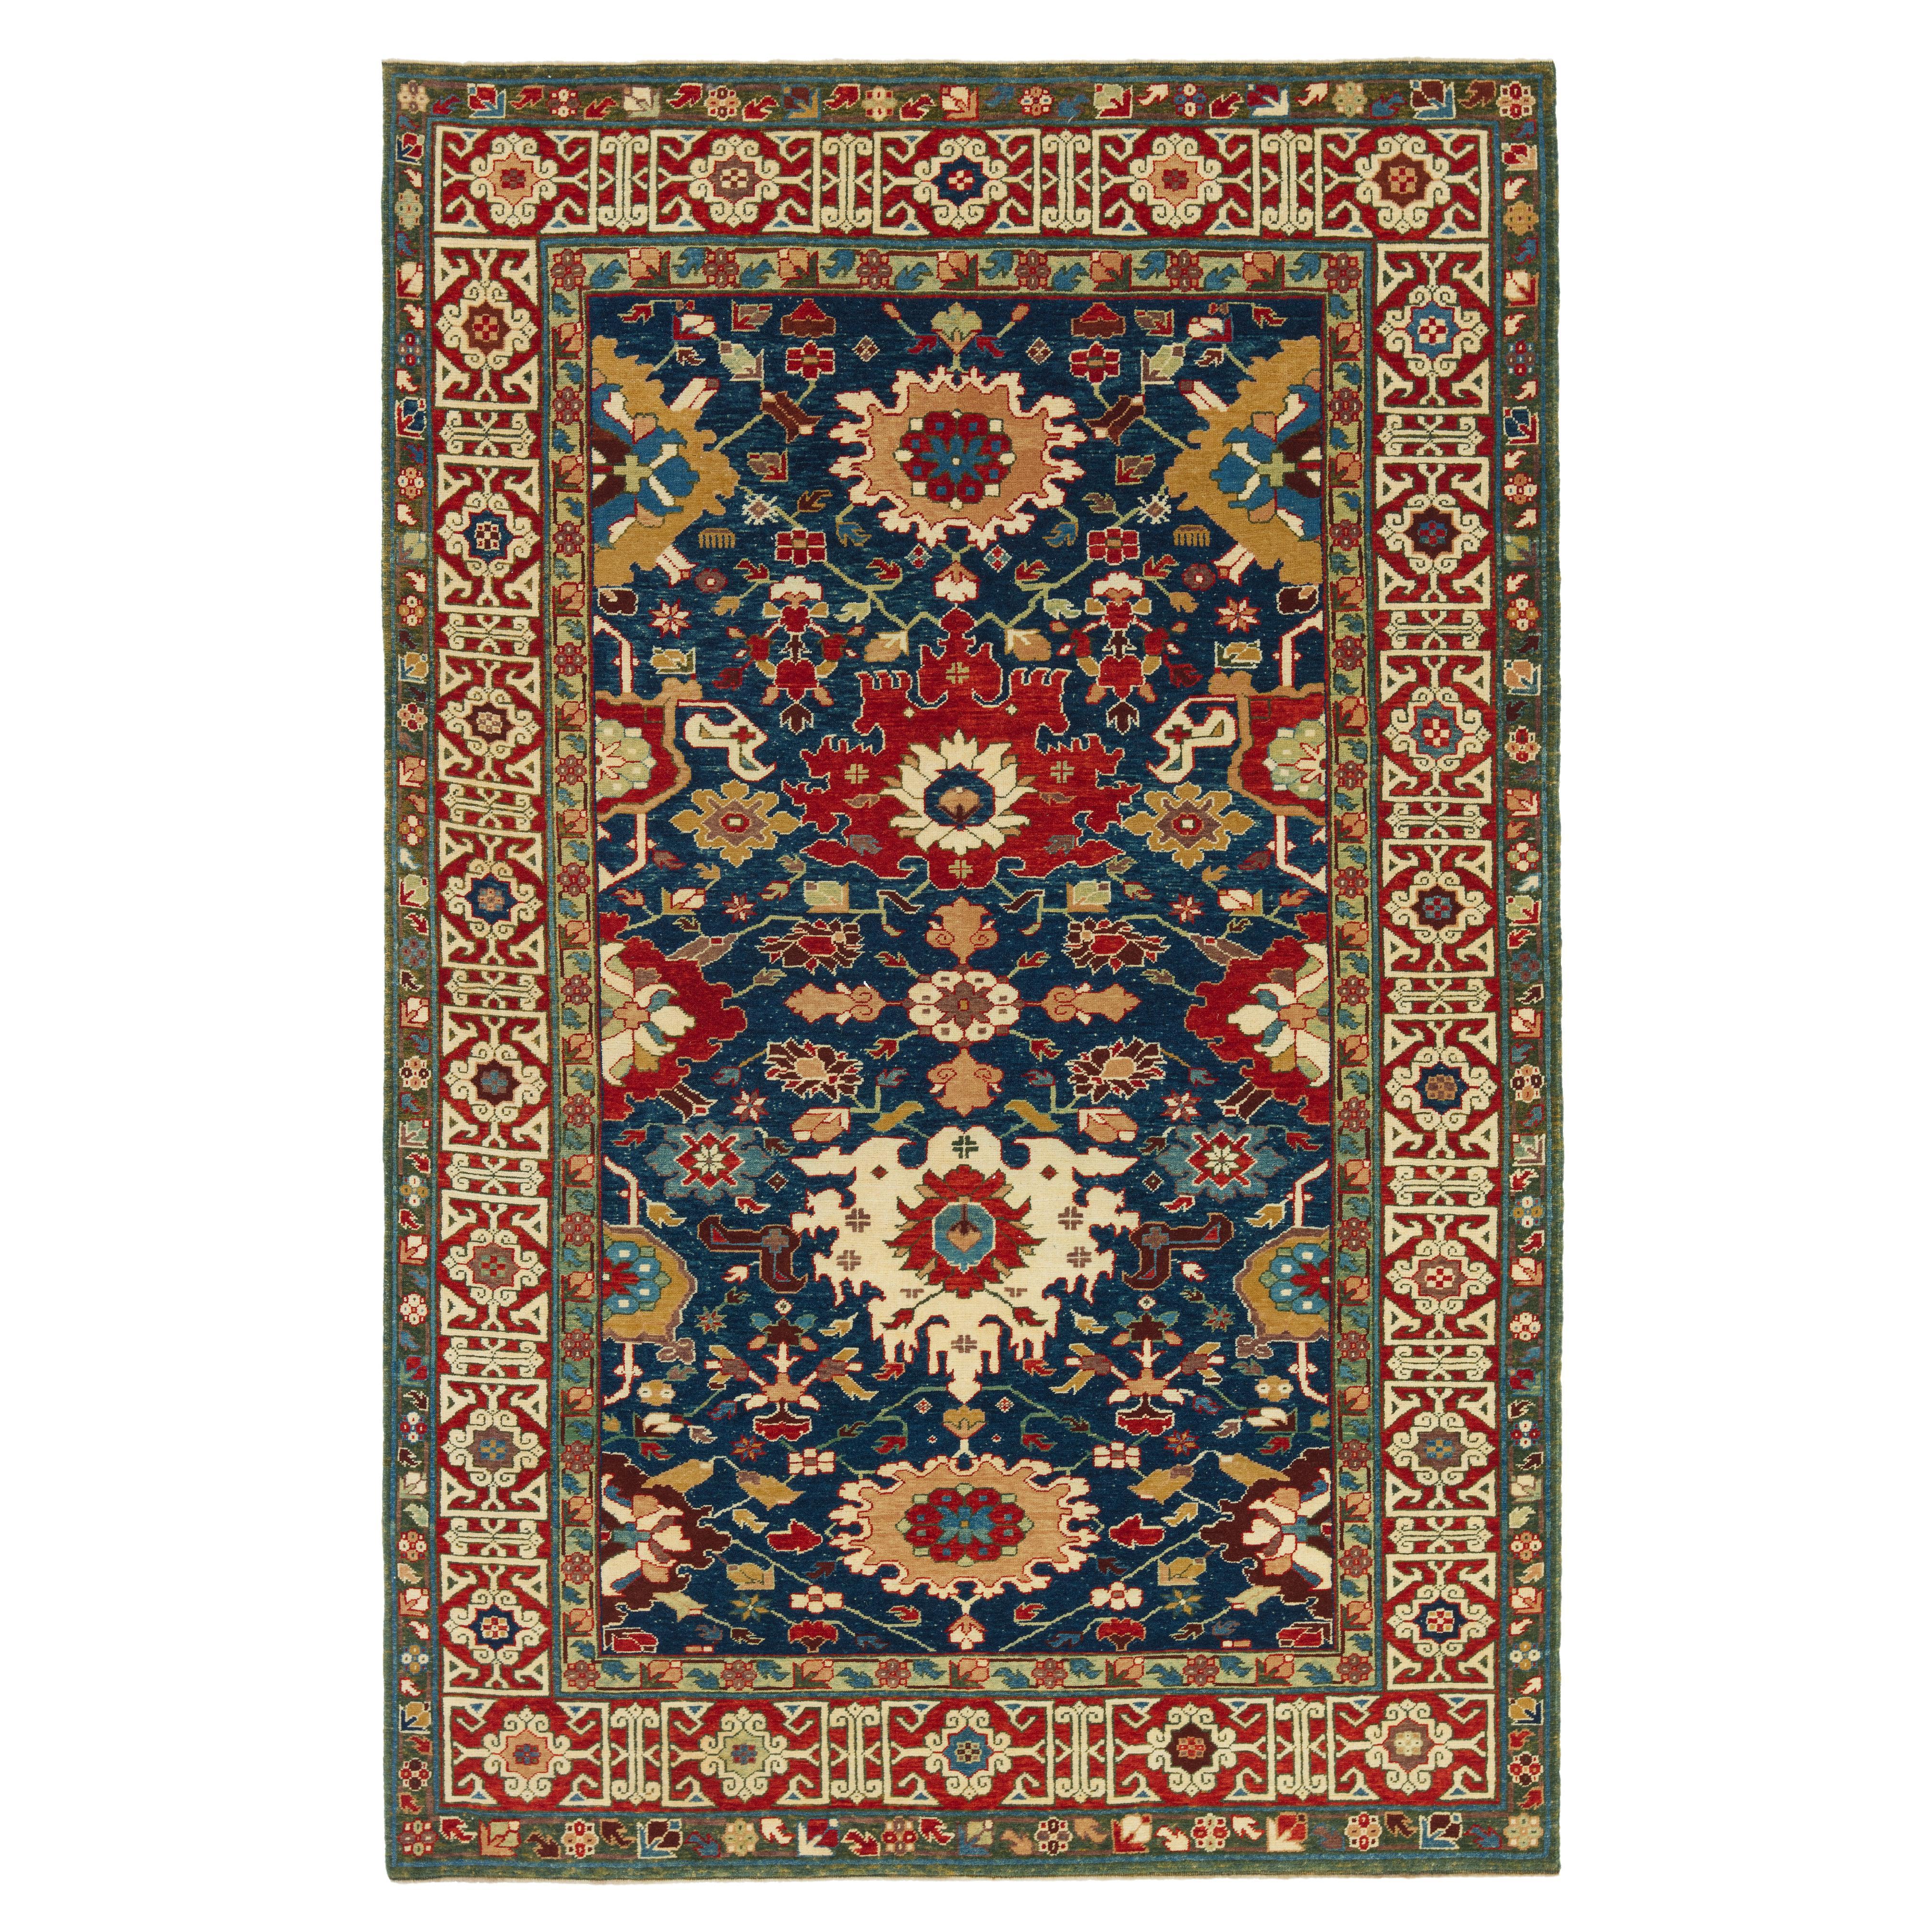 Ararat Rugs Harshang Design with Kufic Border Rug Revival Carpet, Natural Dyed For Sale